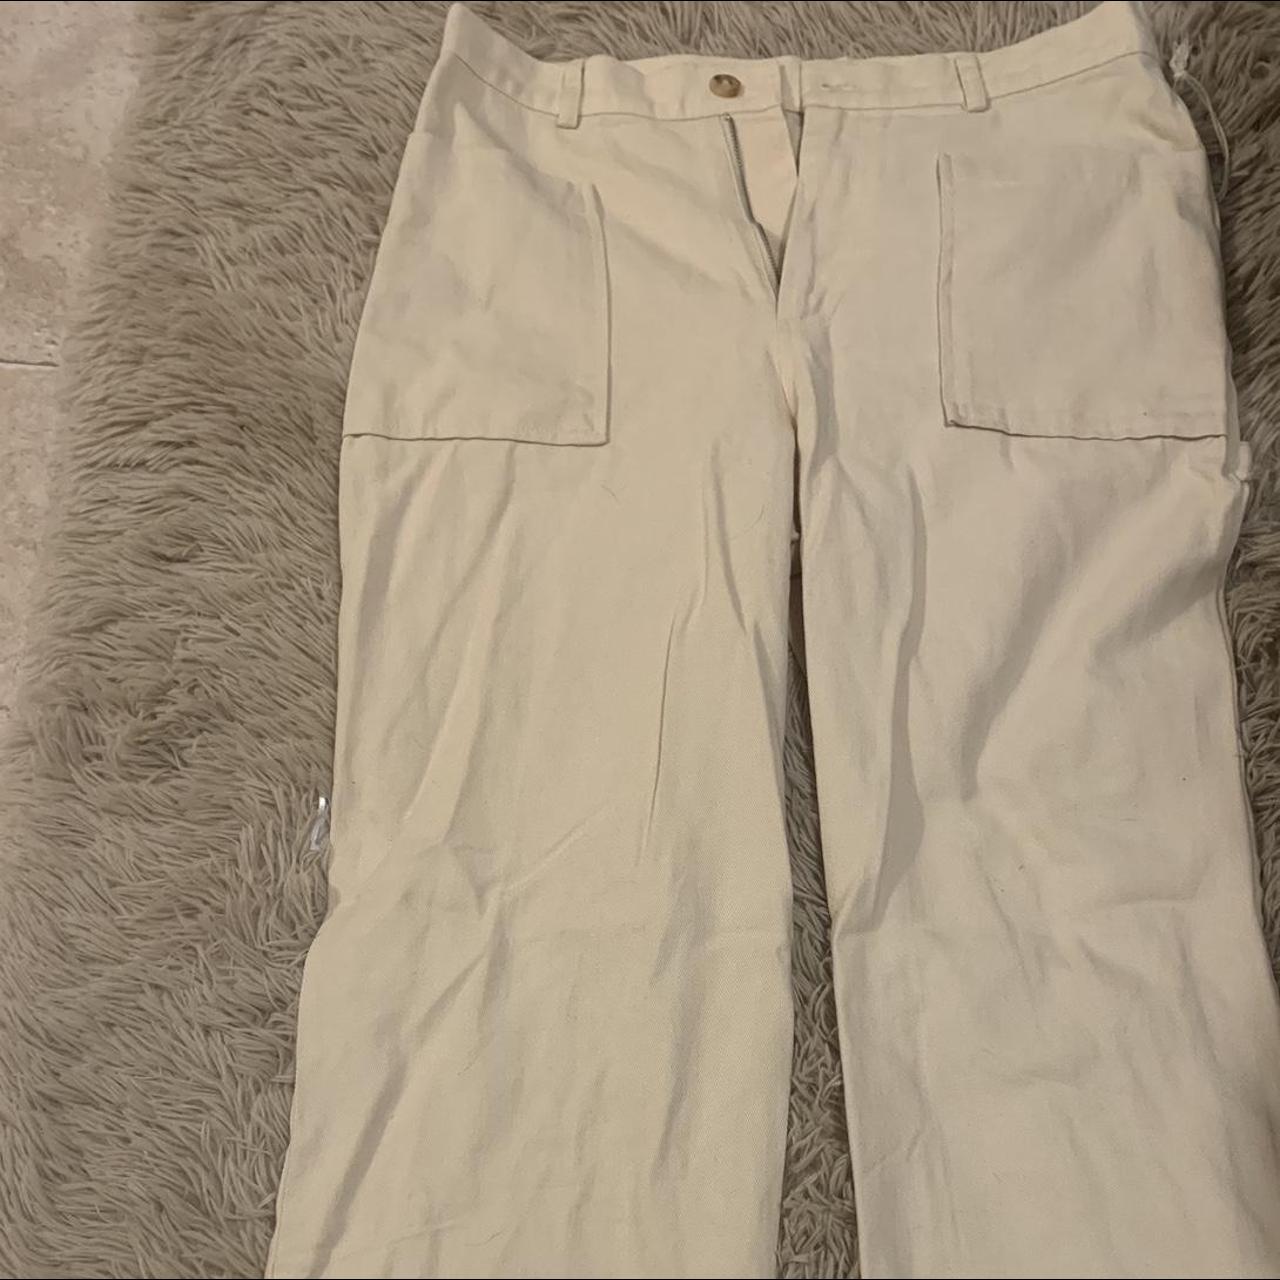 White cargo pants from Tillys that have never been... - Depop